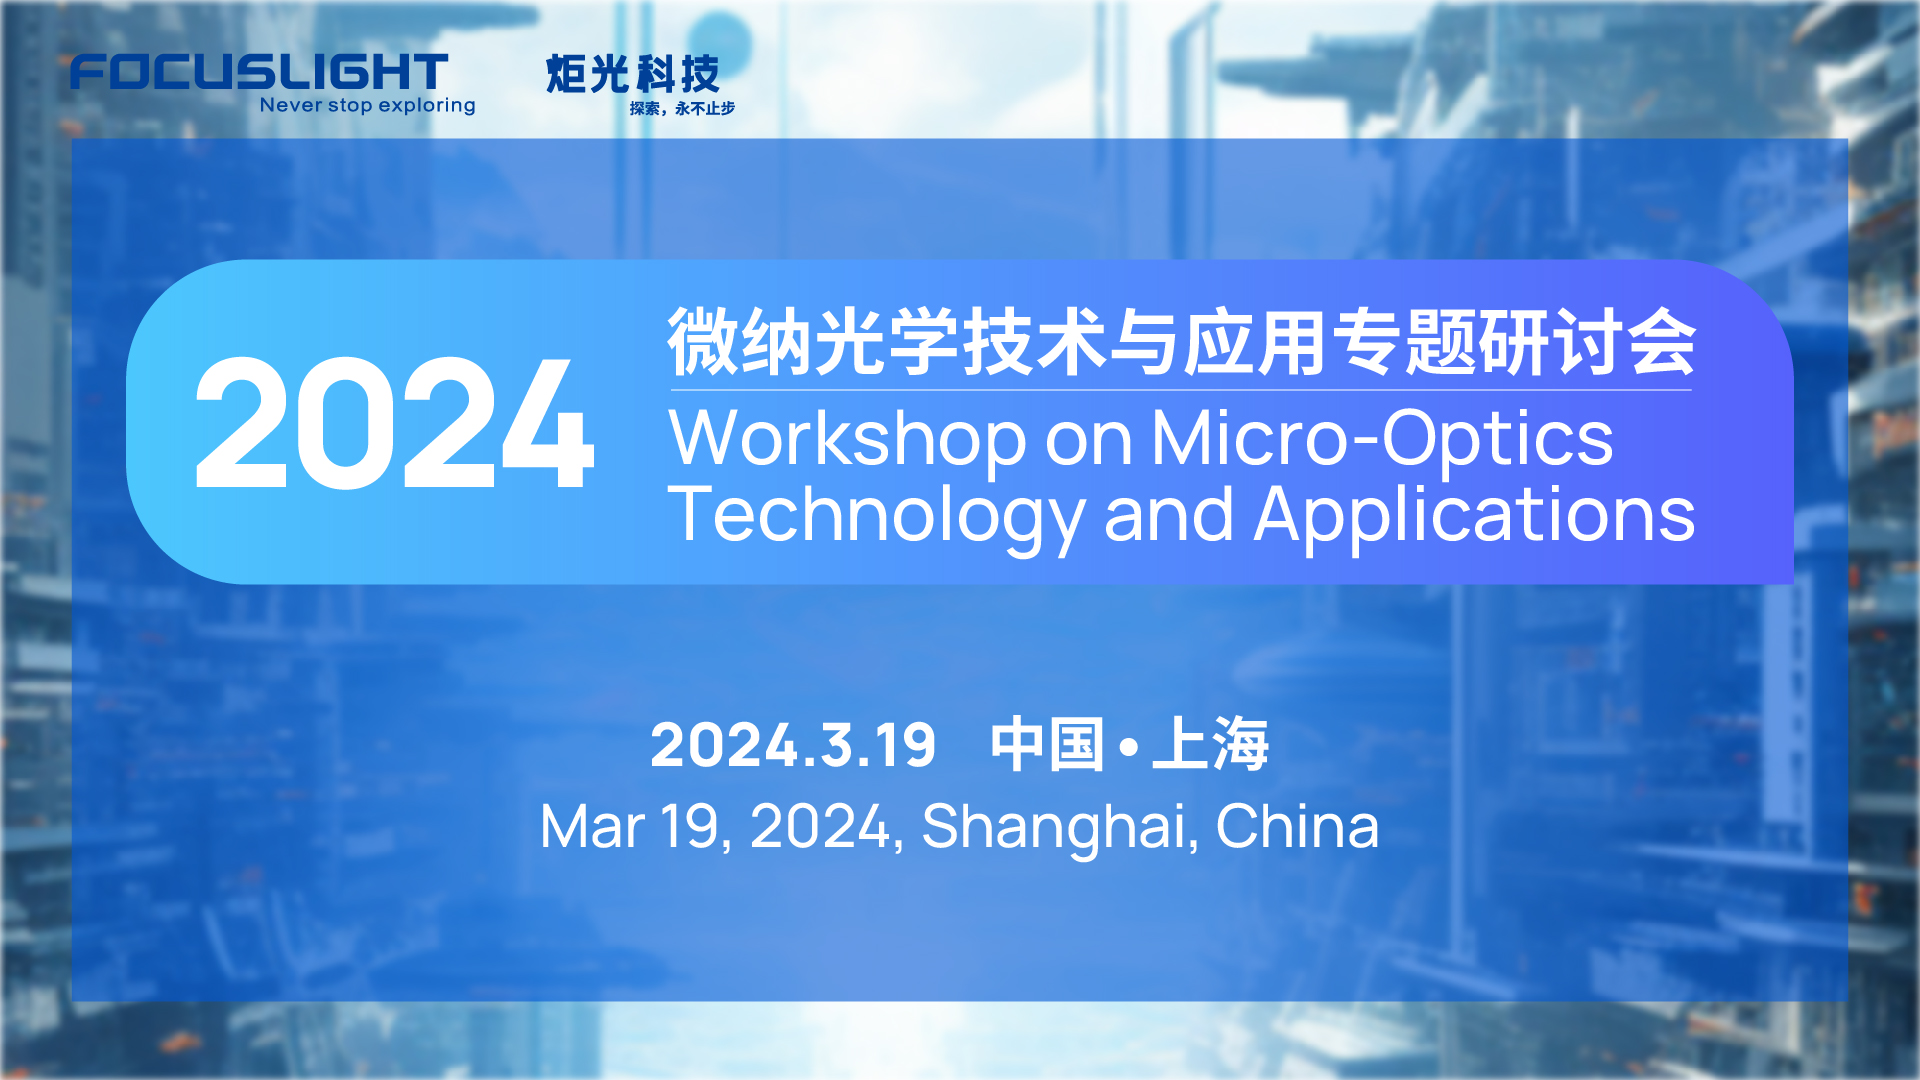 Shanghai Workshop on Micro-Optics Technology and Applications